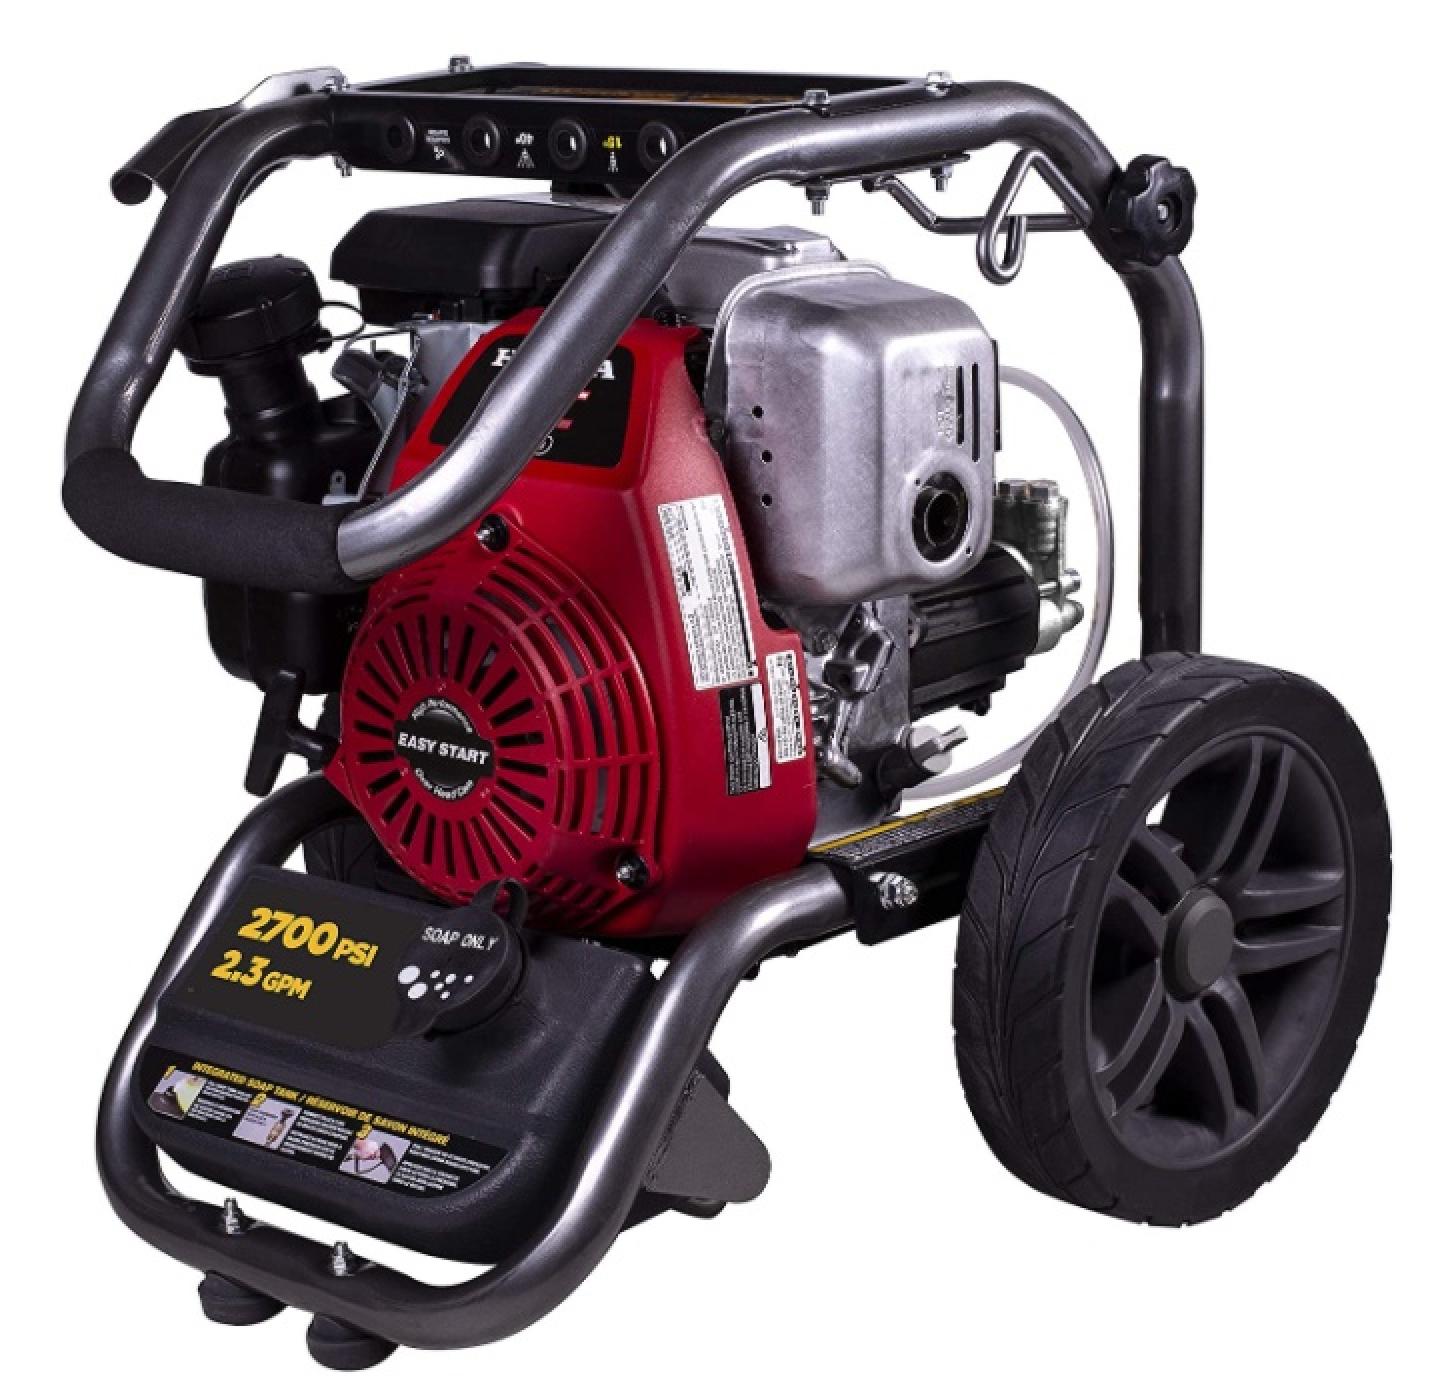 BE Power Equipment Pressure Washer 2700 PSI Folded Down